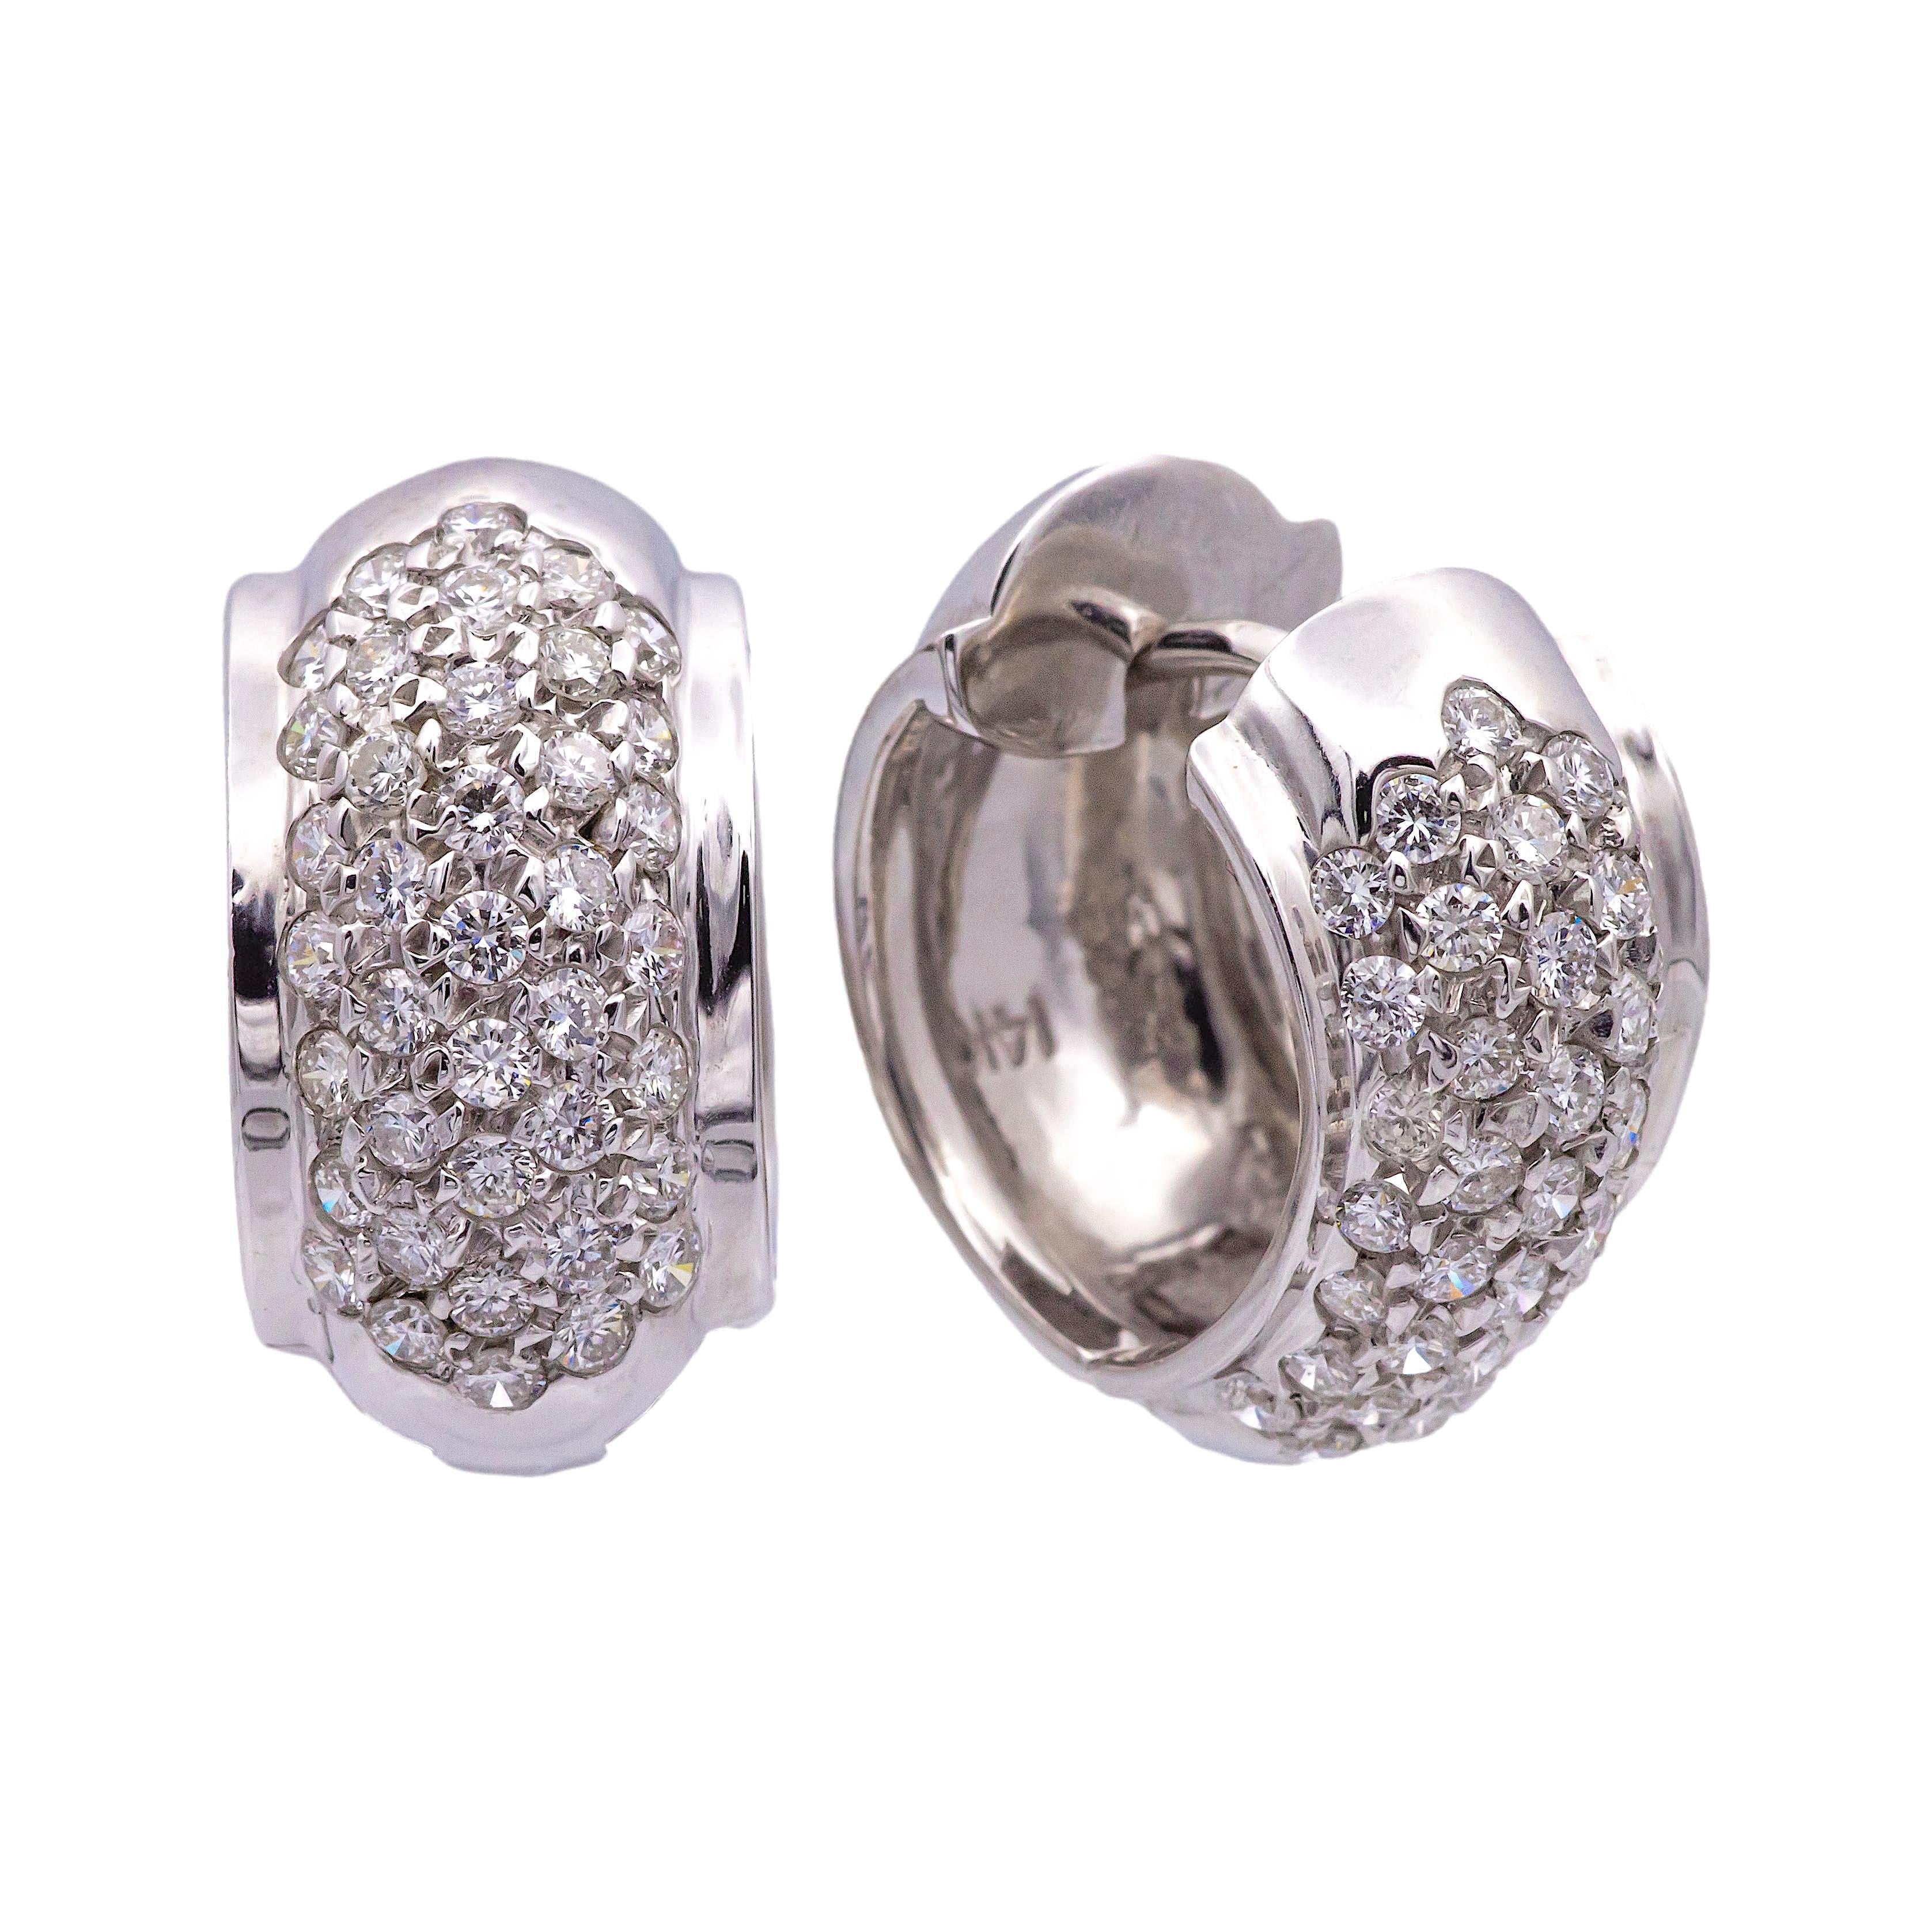 Pair of pave diamond huggie earrings finely crafted in 14K white gold featuring an array of sparkling pave set round brilliant cut diamonds weighing a total of approximately 1.20 carats total weight. Earrings have a hinge closure mechanism and